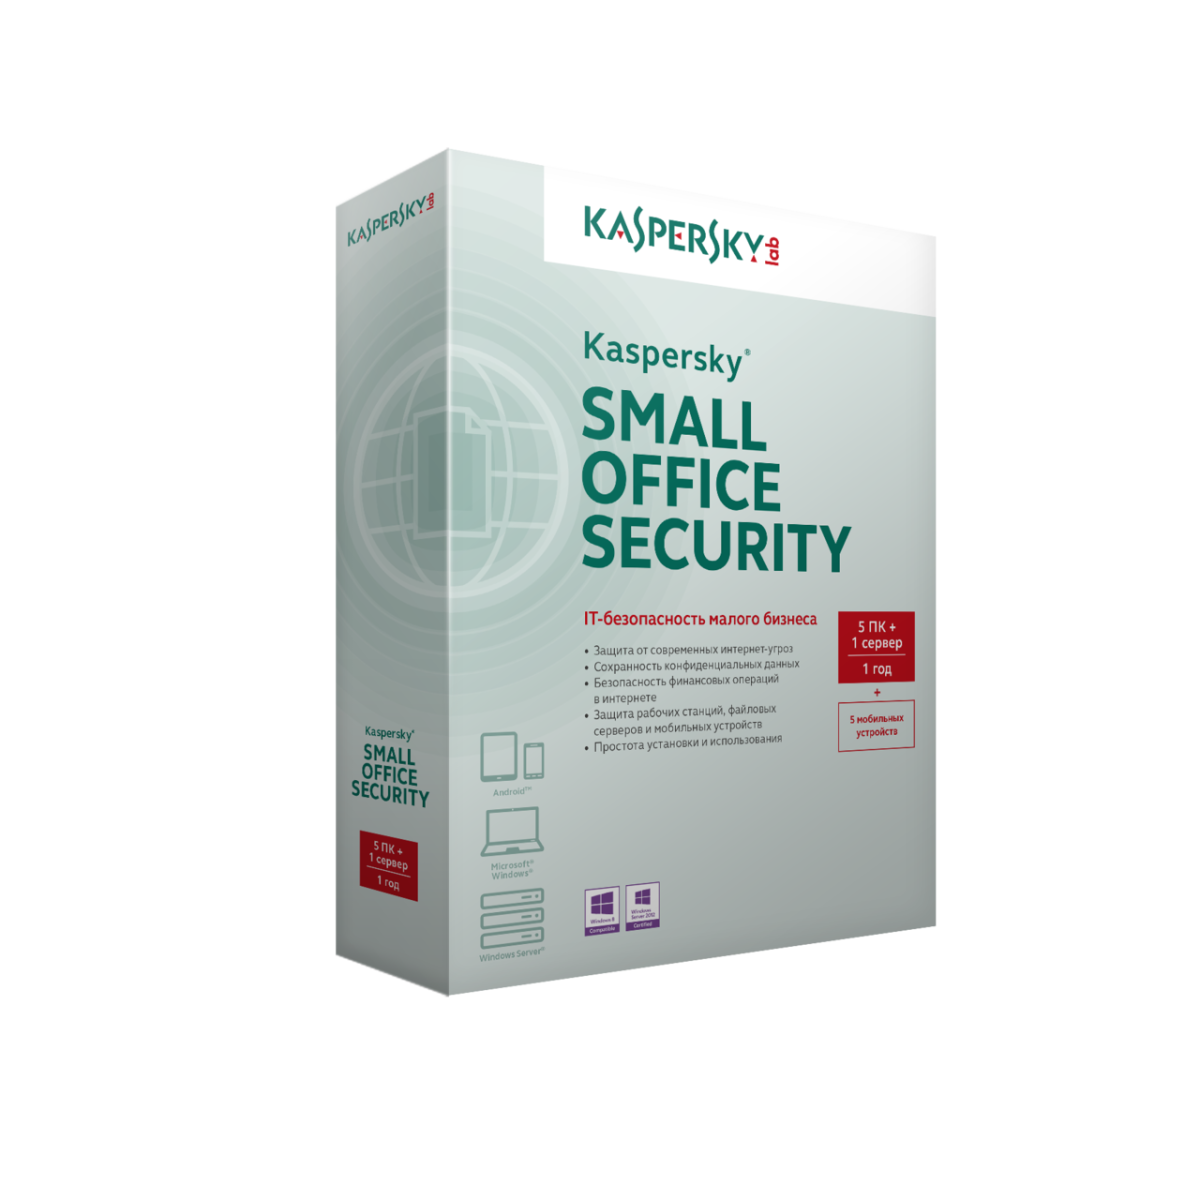 Kaspersky Small Office Security 4 for Desktop, Mobiles and File Servers (fixed-date) Rus. 10-14